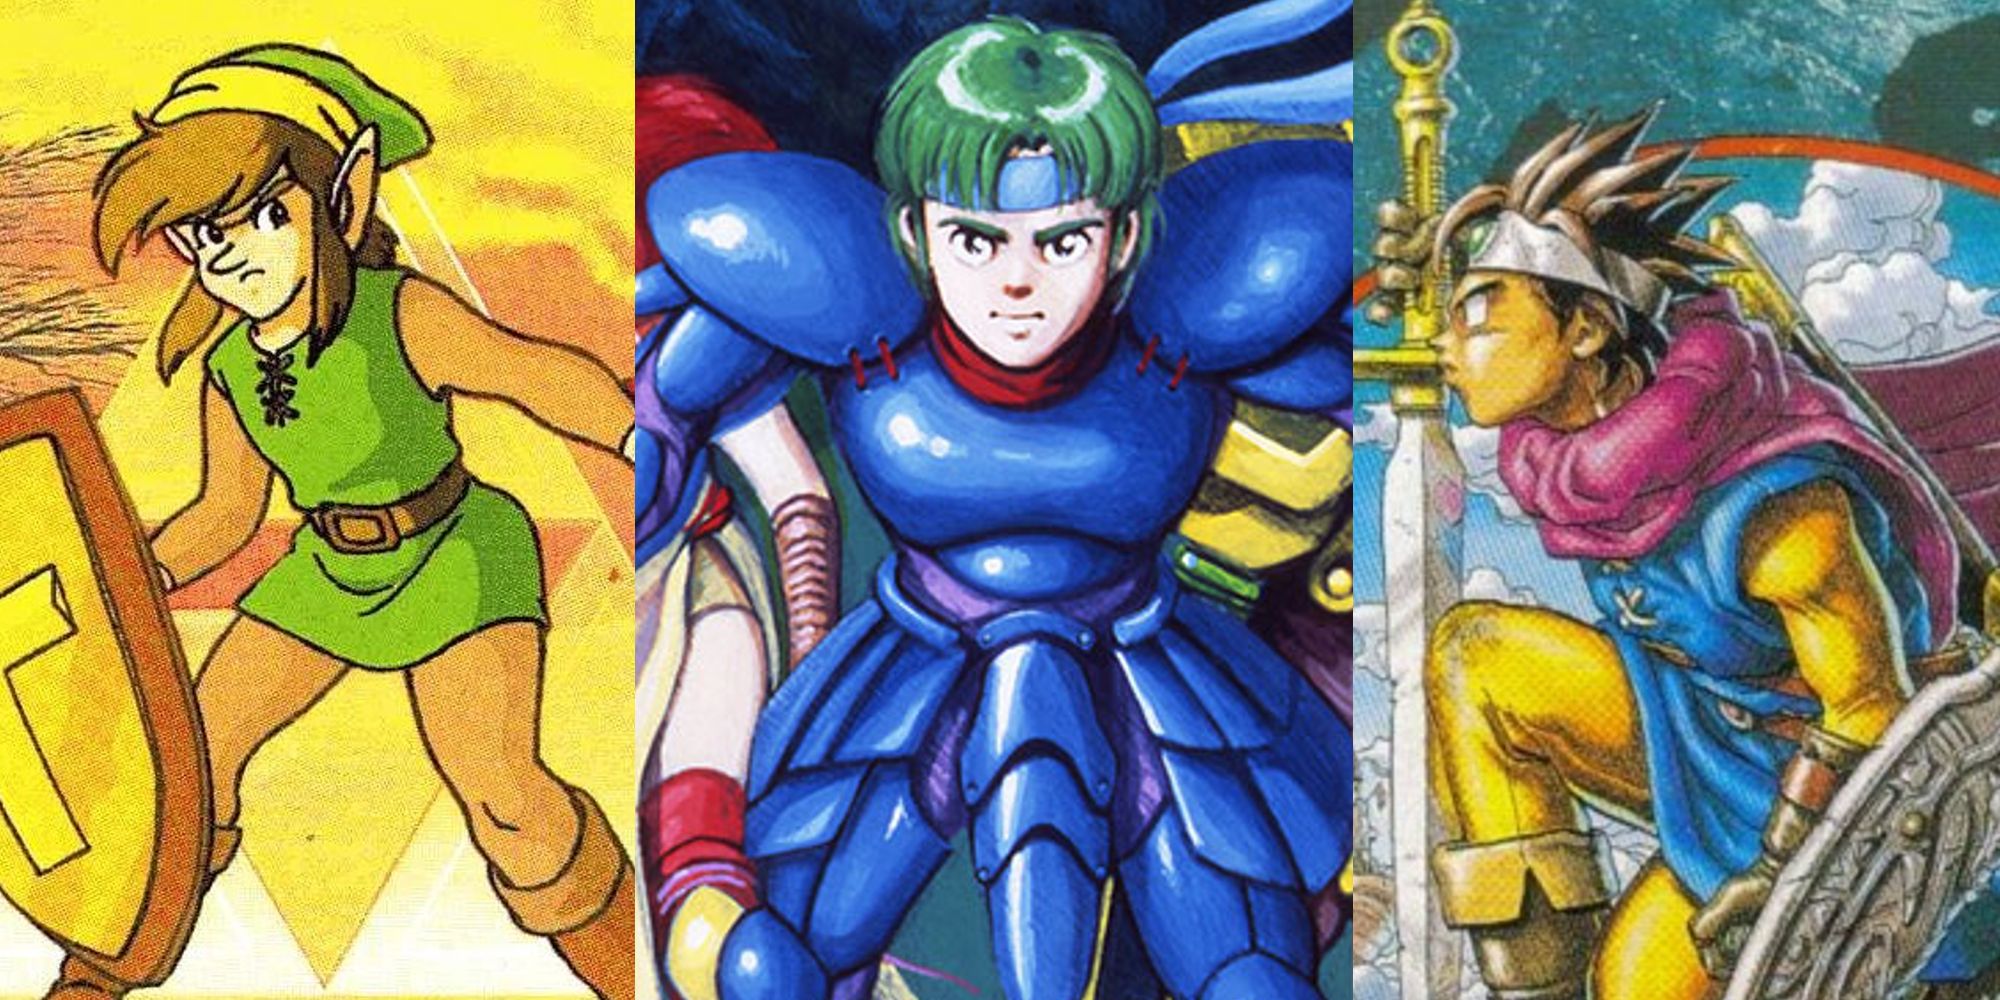 Link with sword and shield; Alm in blue armor; Erdrick kneeling